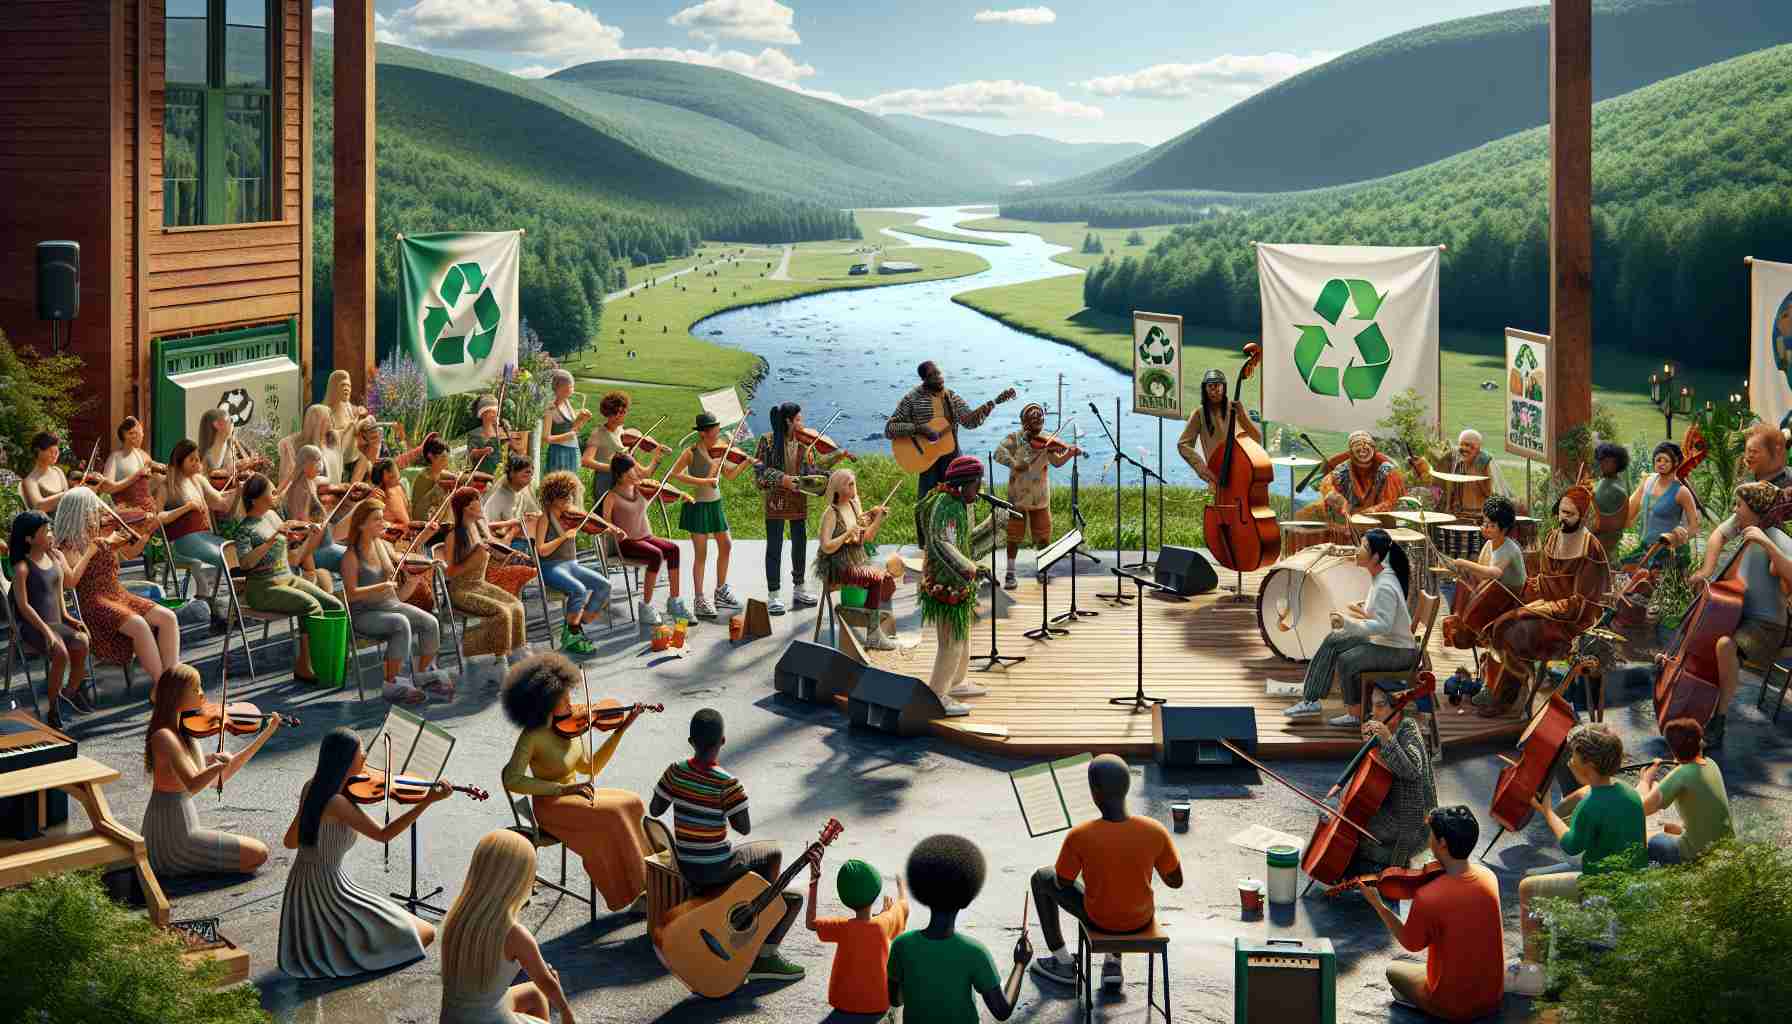 Create a high-definition realistic image of a community music initiative event unfolding in Vermont. The atmosphere of the event should convey a clear message of promoting environmental awareness. Include elements such as eco-friendly constructions, displays of recycling and conservation methods, and banners with powerful messages of safeguarding the environment. A mix of diverse people, including Caucasian women playing guitars, Black men tuning their violins, a Middle-Eastern woman leading an environmental discussion on the stage, and South Asian children wearing earth-themed costumes, all engaged in making this event a success. The picturesque landscape of Vermont with its lush green mountains and sparkling rivers acts as the perfect backdrop.